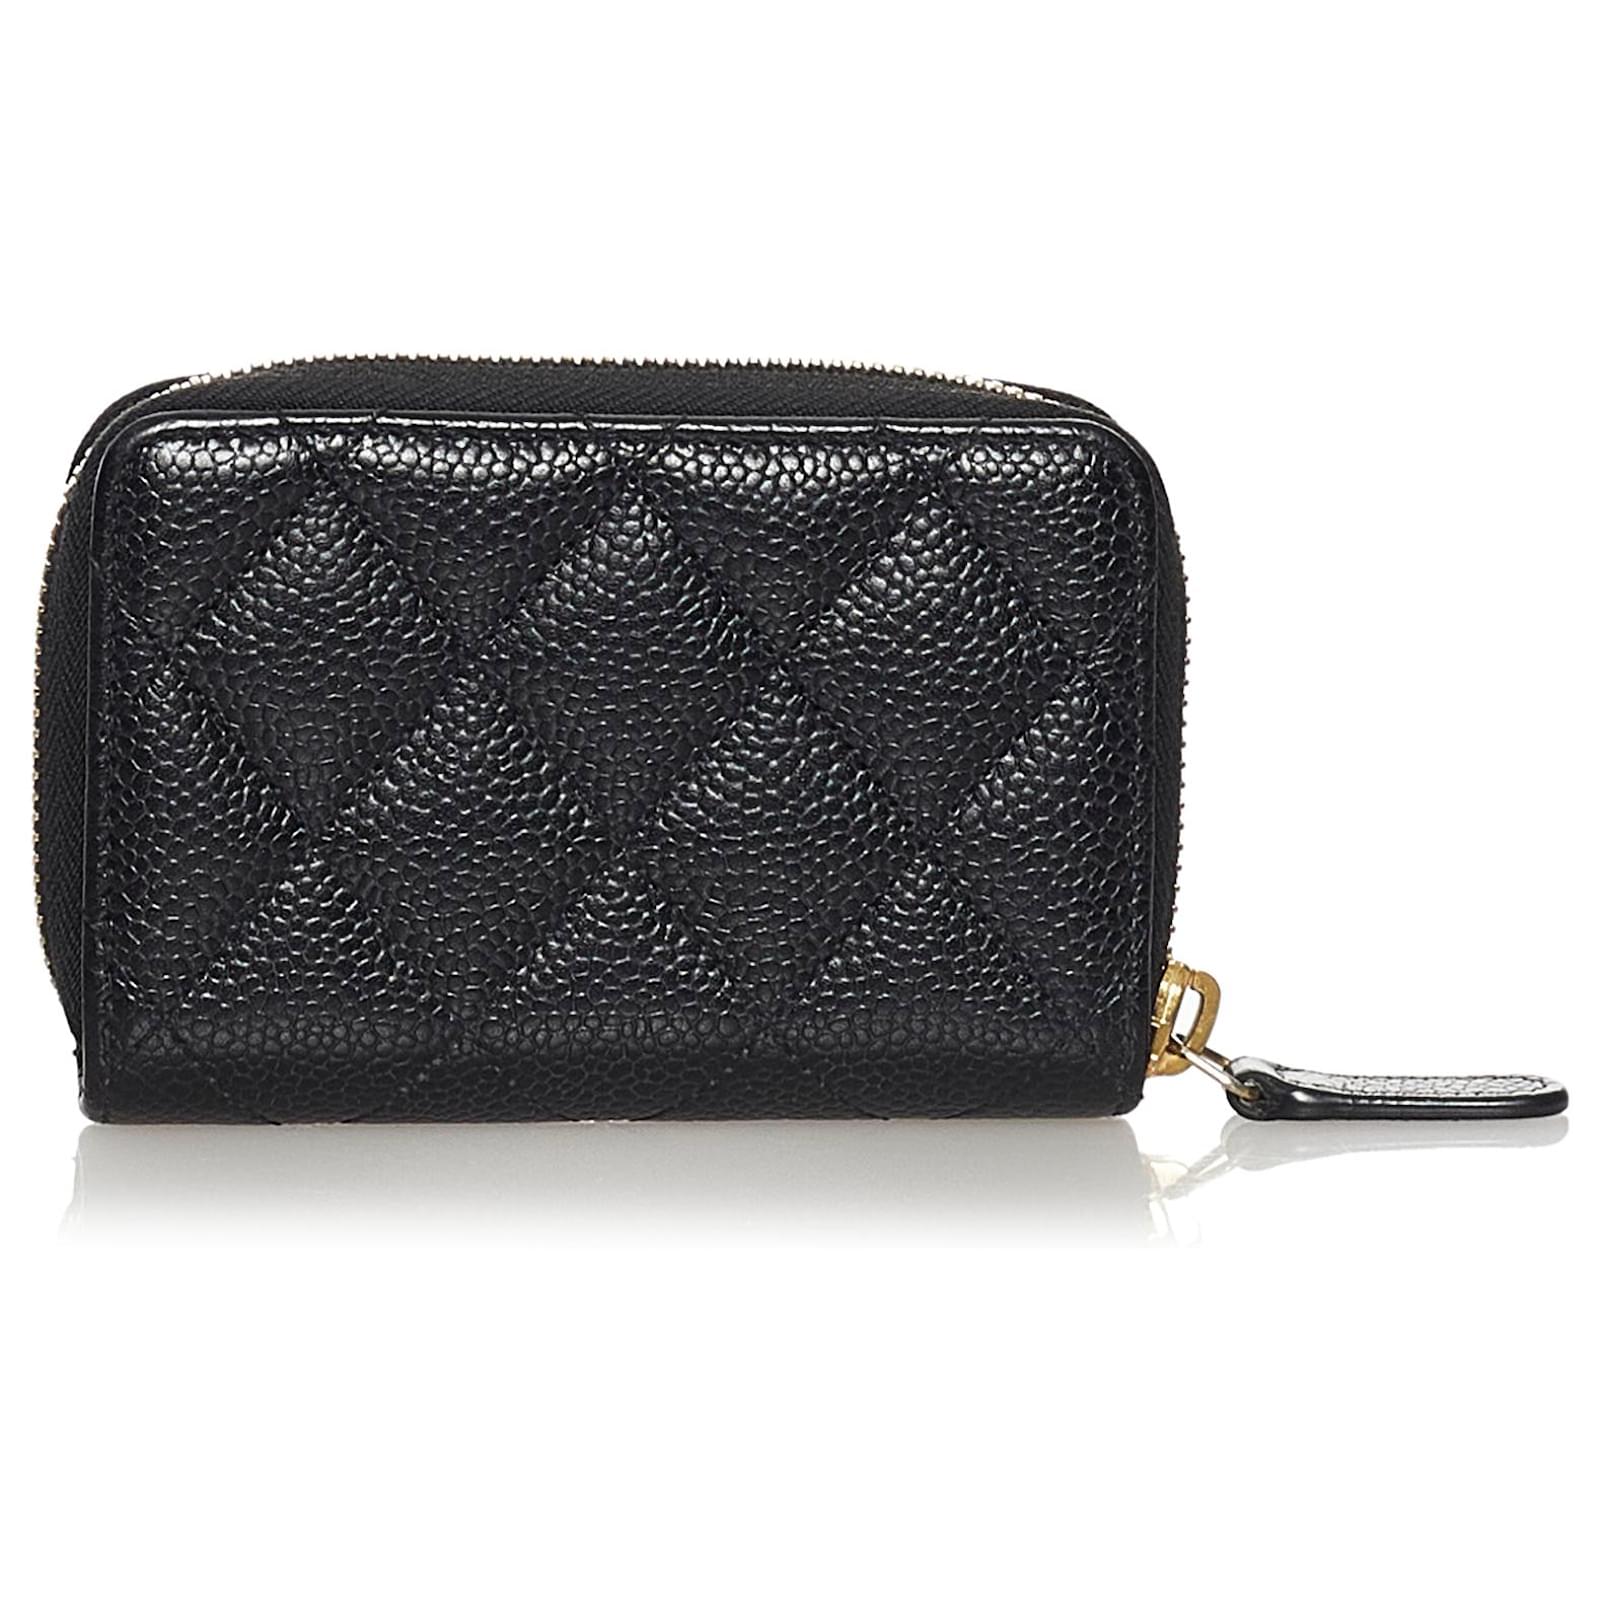 CHANEL Medallion Quilted Caviar Leather Tote Bag Black